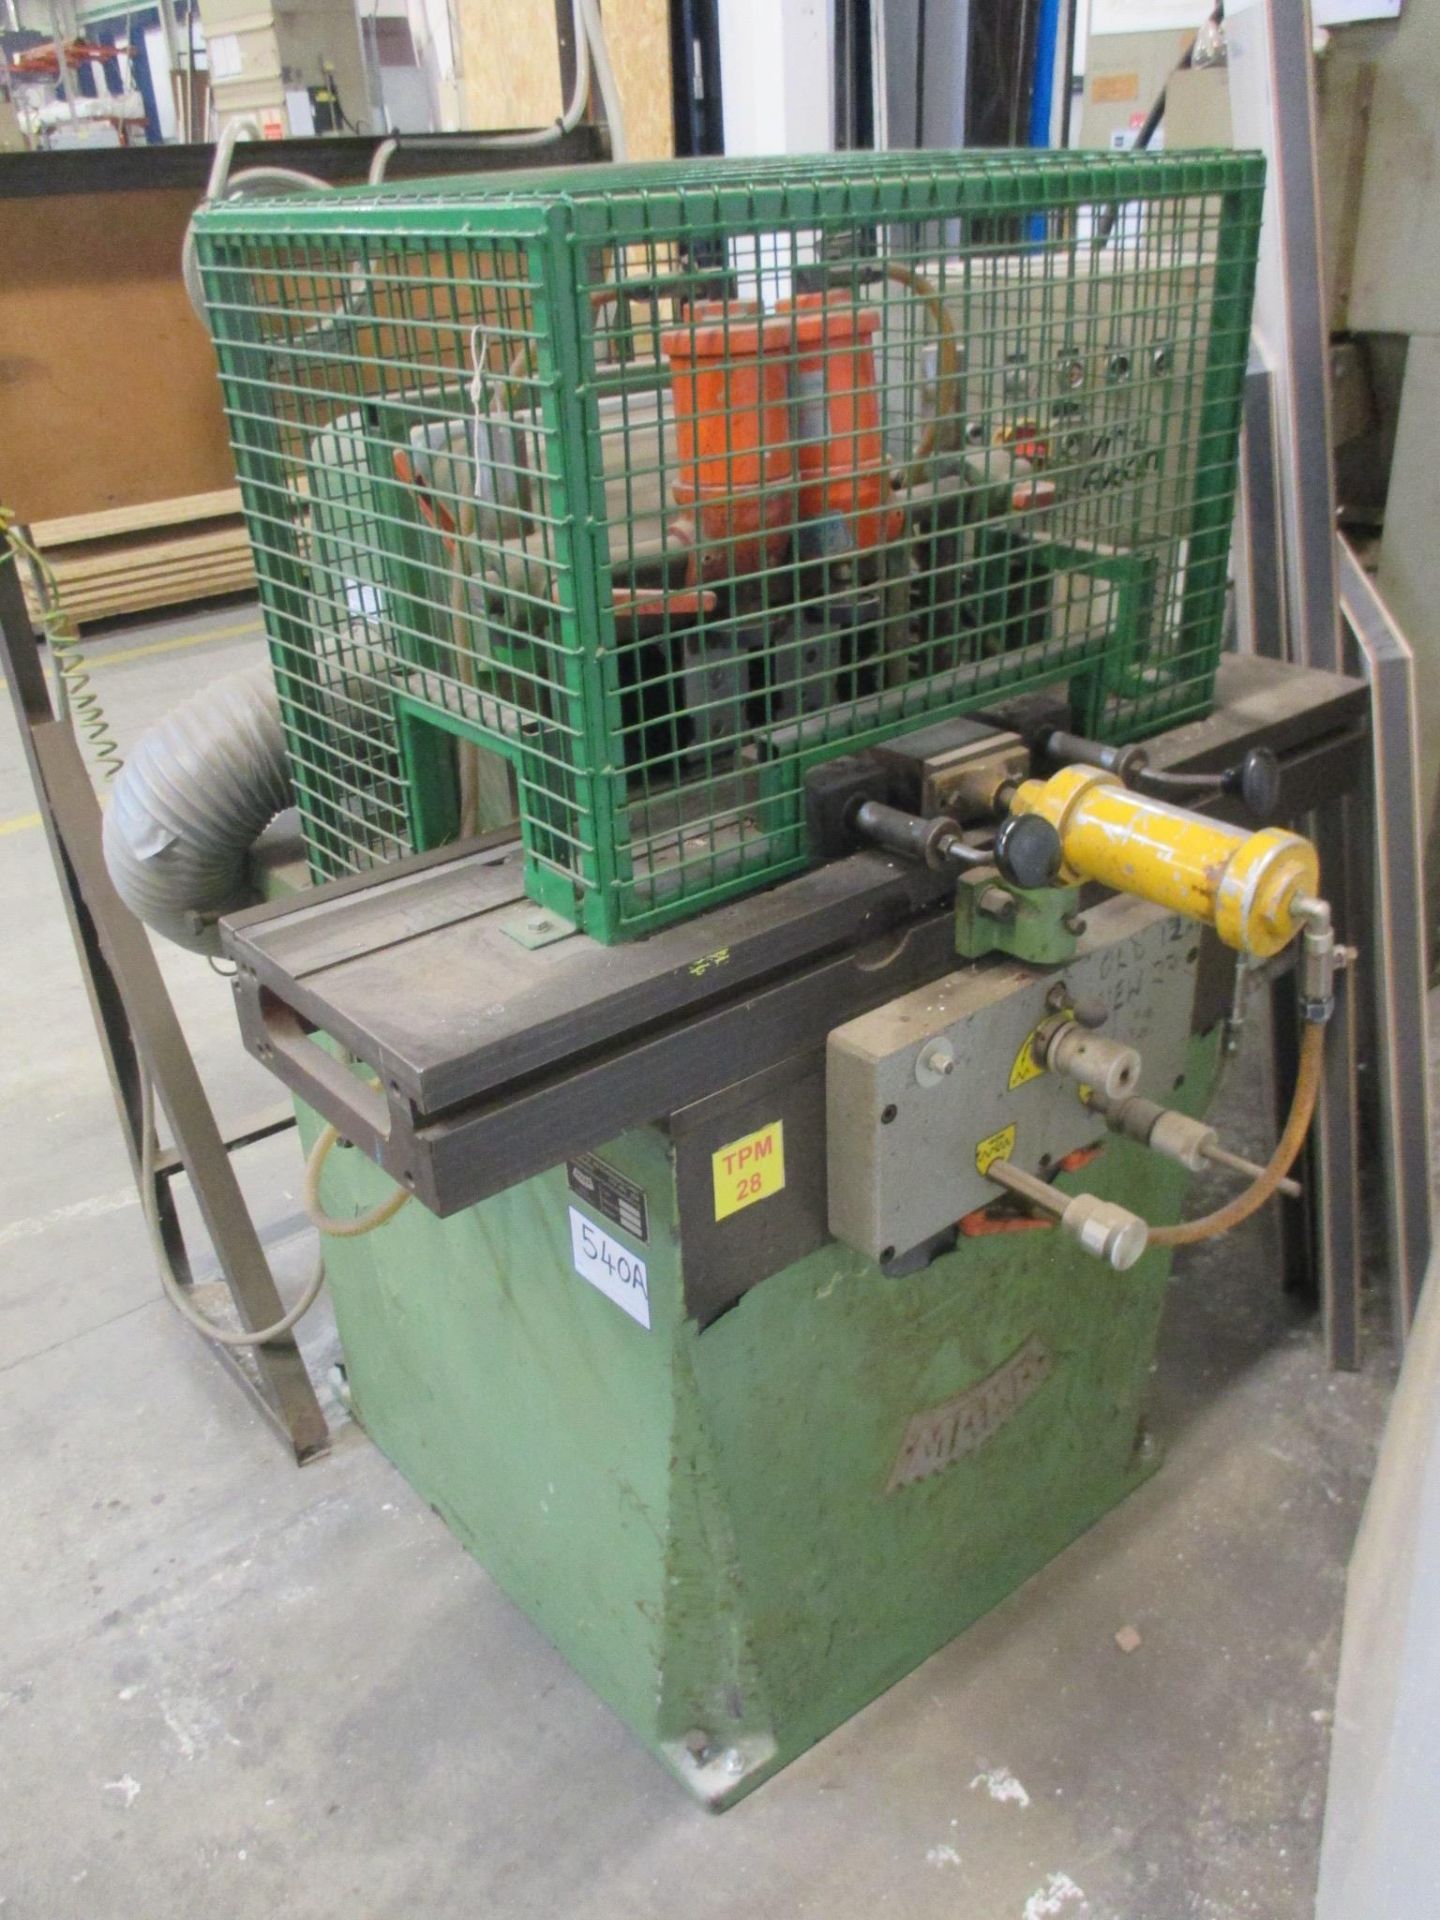 1: Interwood/Maka, STV-61, Tenon/Morticer Compelte With DCE Dust Extraction, Serial Number: 814664,